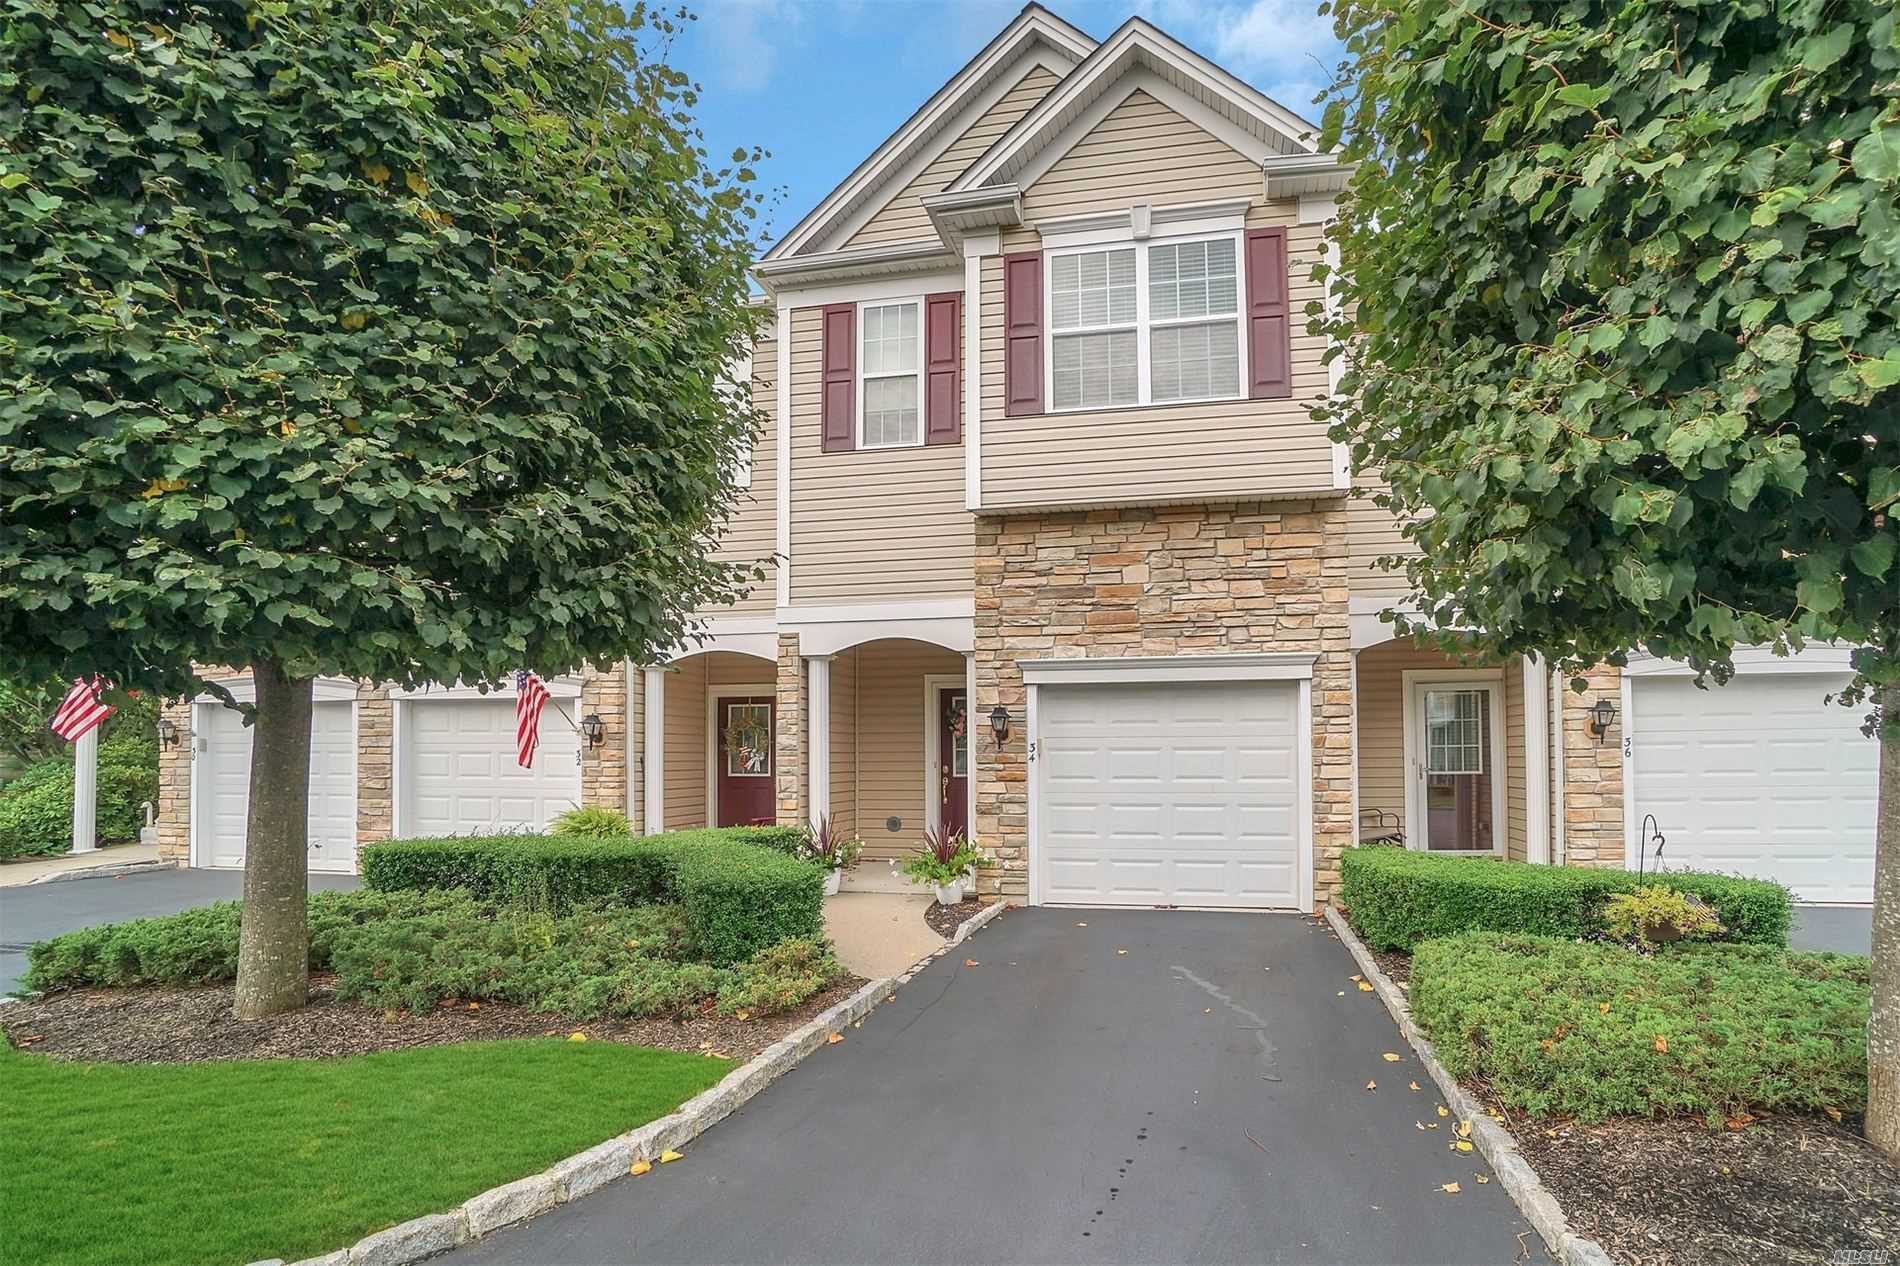 move in ready and immaculate townhouse, bright and open, 55 and over, Elevator to all floors, finished basement, great location, community pool and club house, 2 master suites w/walk in closets, open kitchen/living with slider to a lg deck, 1 car garage, washer/dryer on bedroom level,